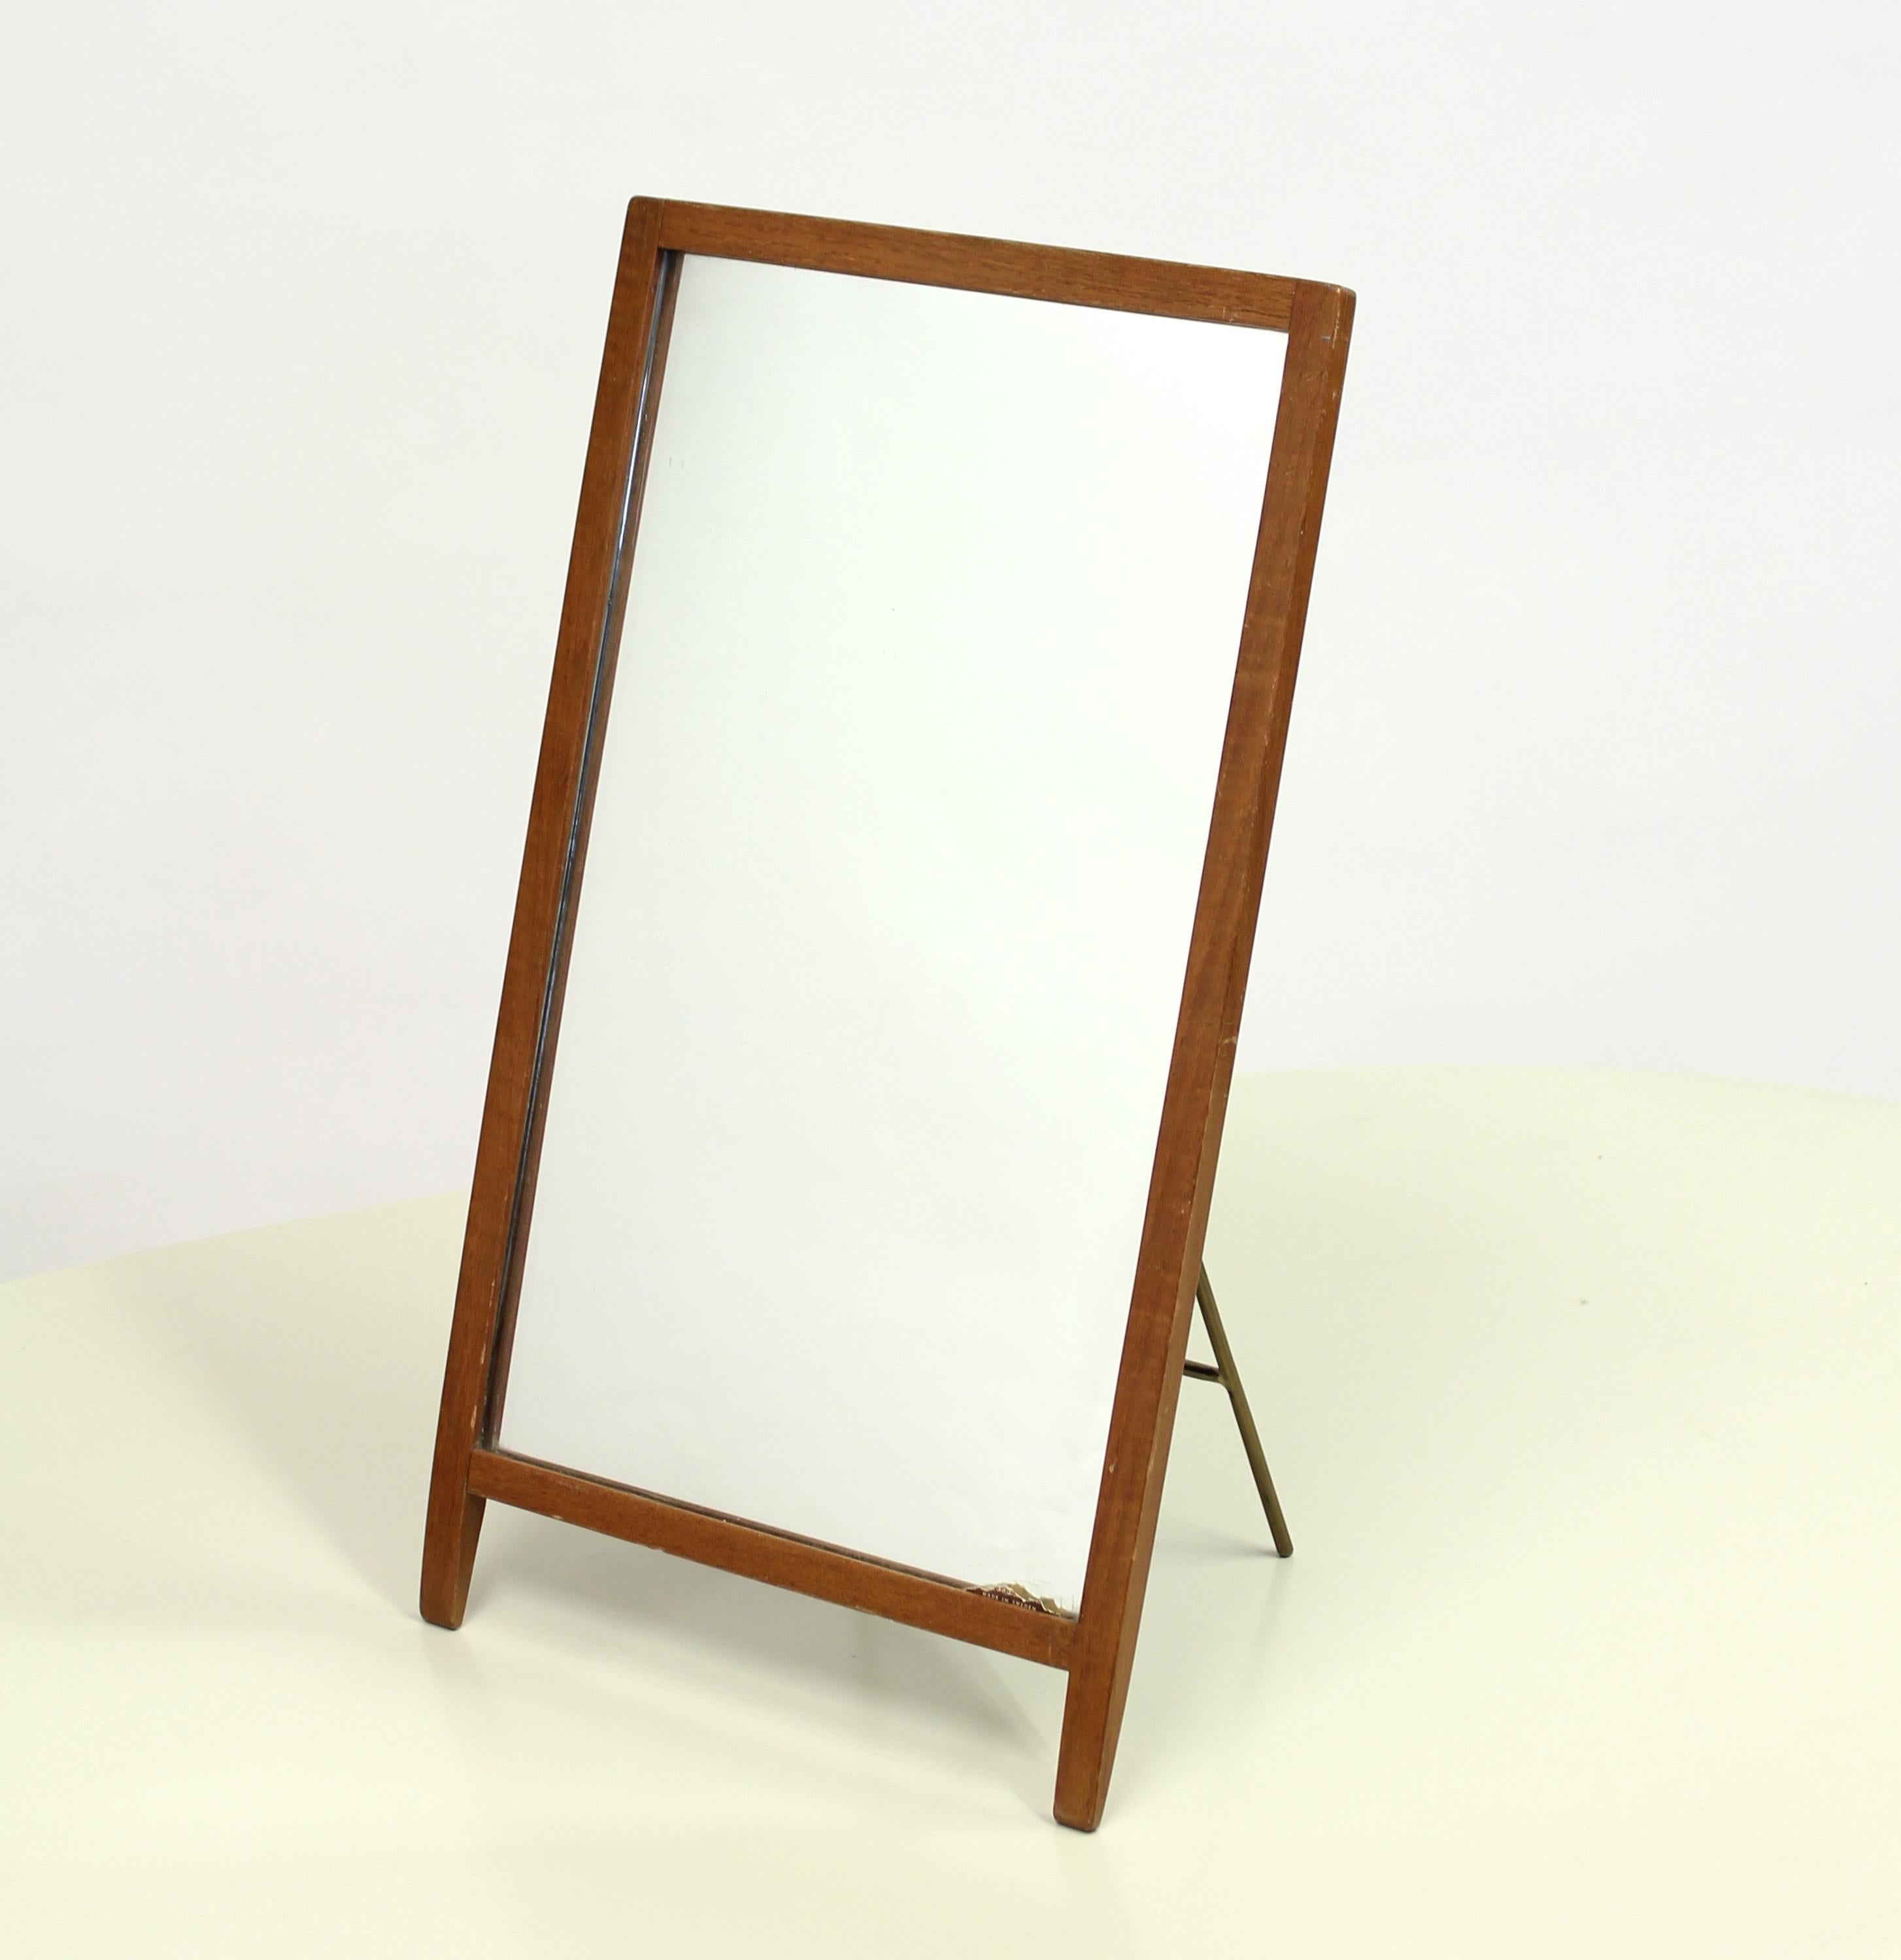 Very rare table mirror designed by Hans-Agne Jakobsson for his own company Hans-Agne Jakobsson AB Markaryd in the 1960s. Frame is made of teak and back with original black painted wood with foldable brass stand. Little bit of the original makers